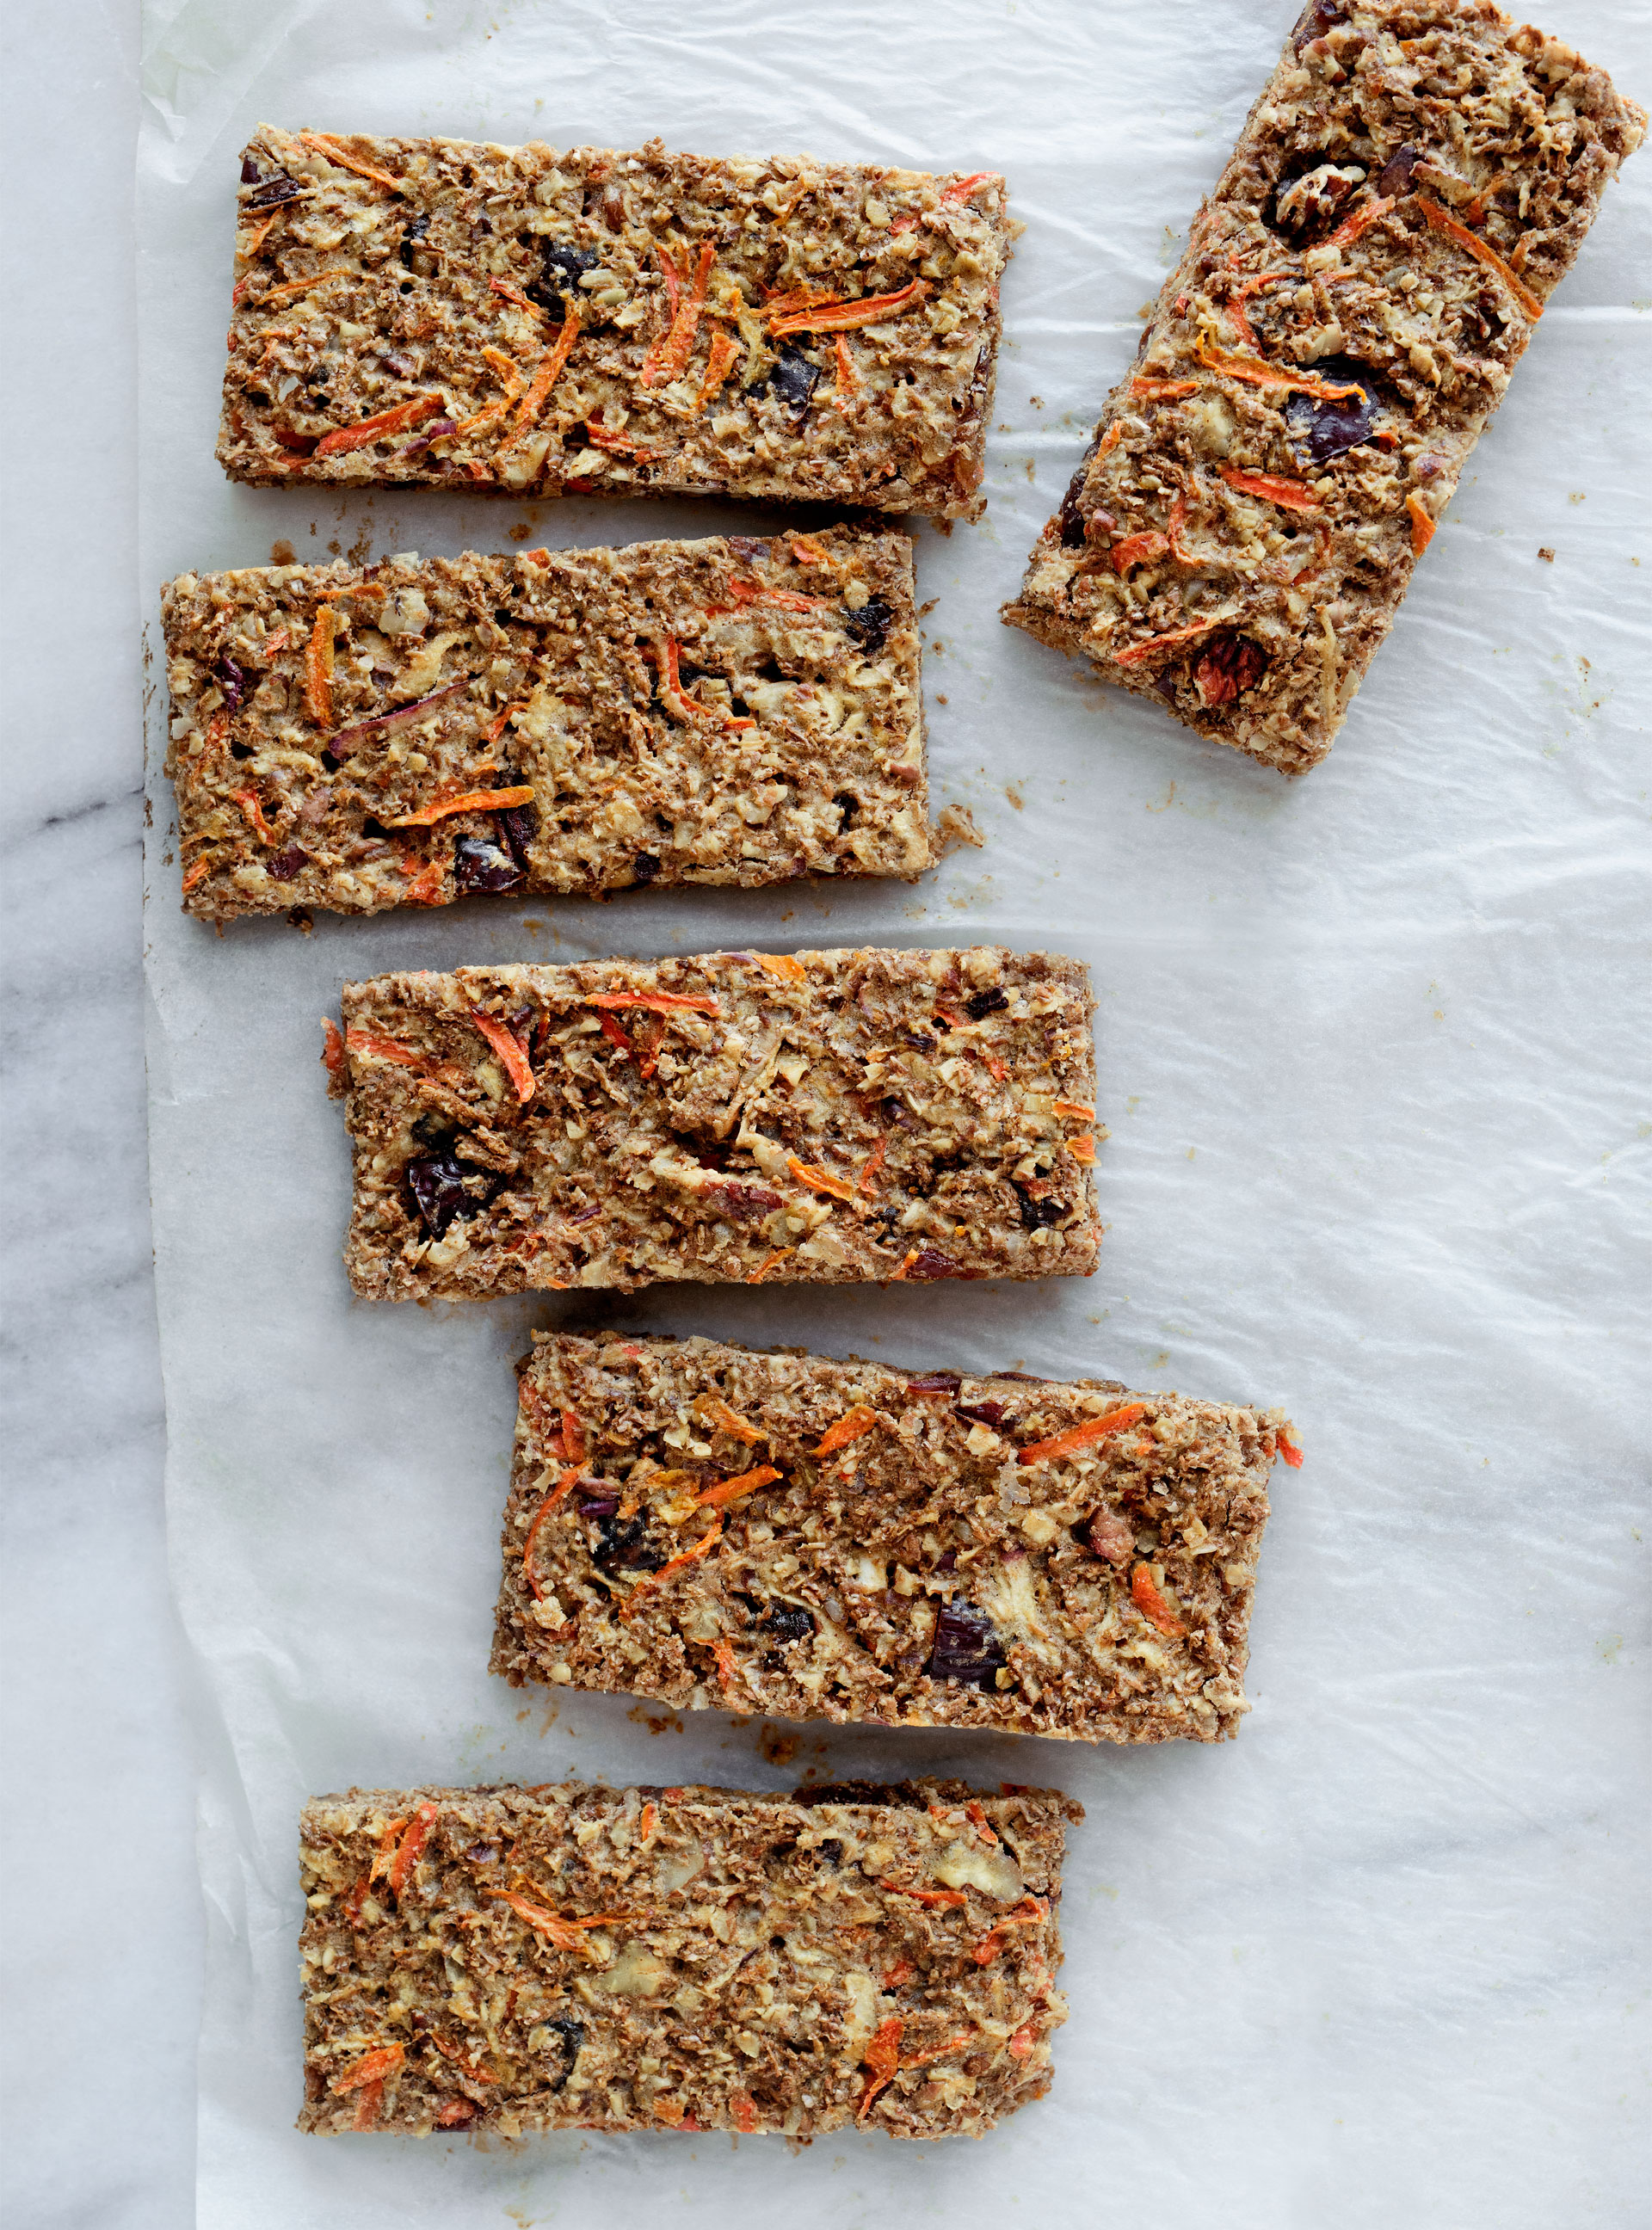 Breakfast Bar with Apple and Carrot